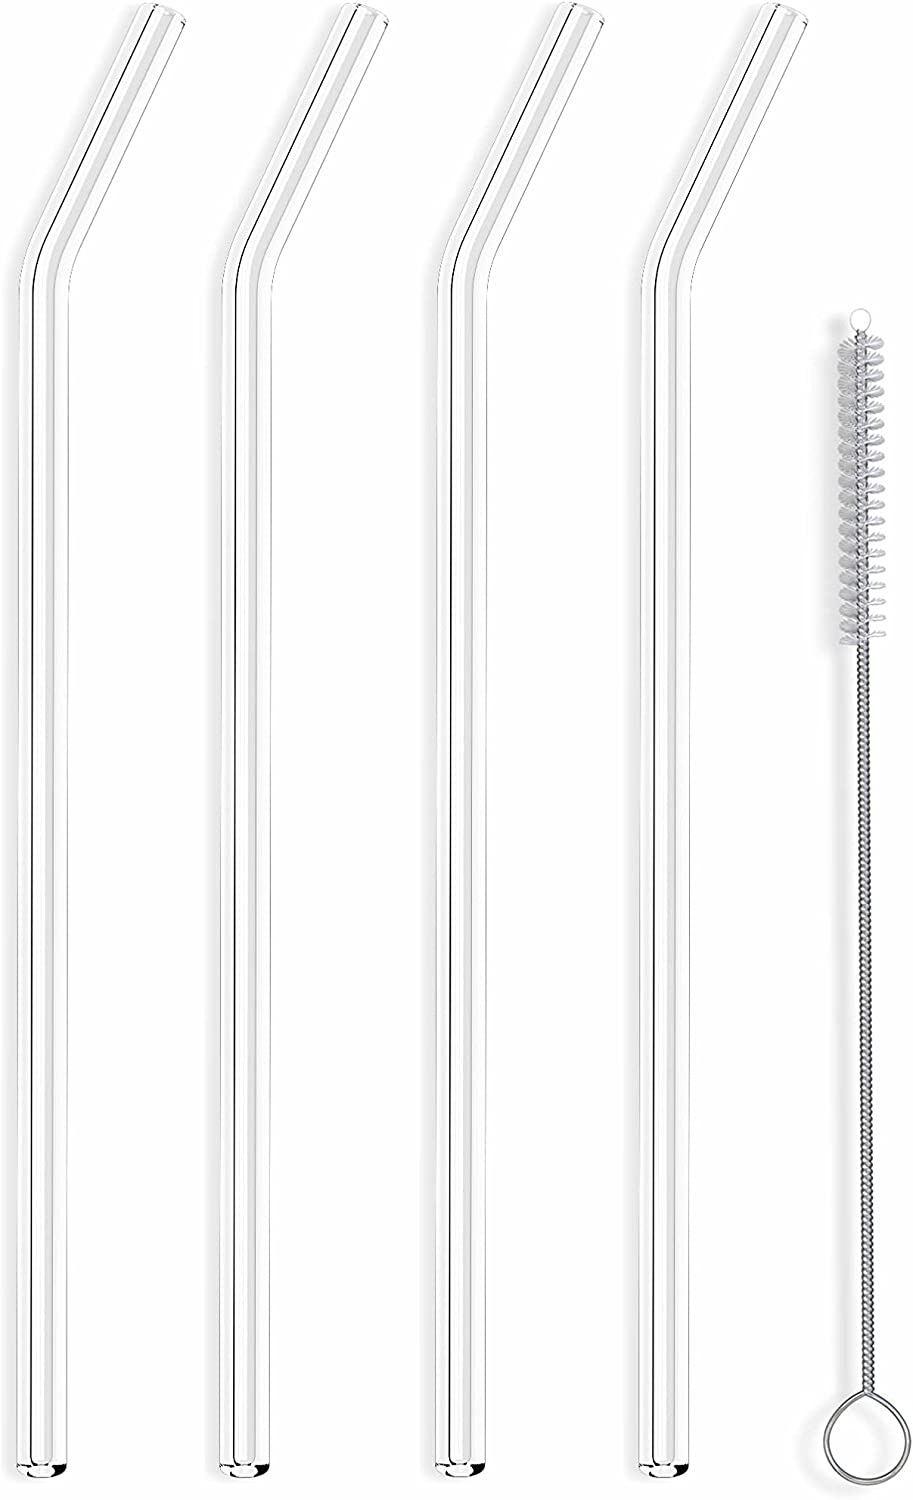 Hummingbird Glass Straws Clear 9″ x 7 mm Long Reusable Straw Designed for Yeti and Starbucks Style Tumblers Made Wth Pride in